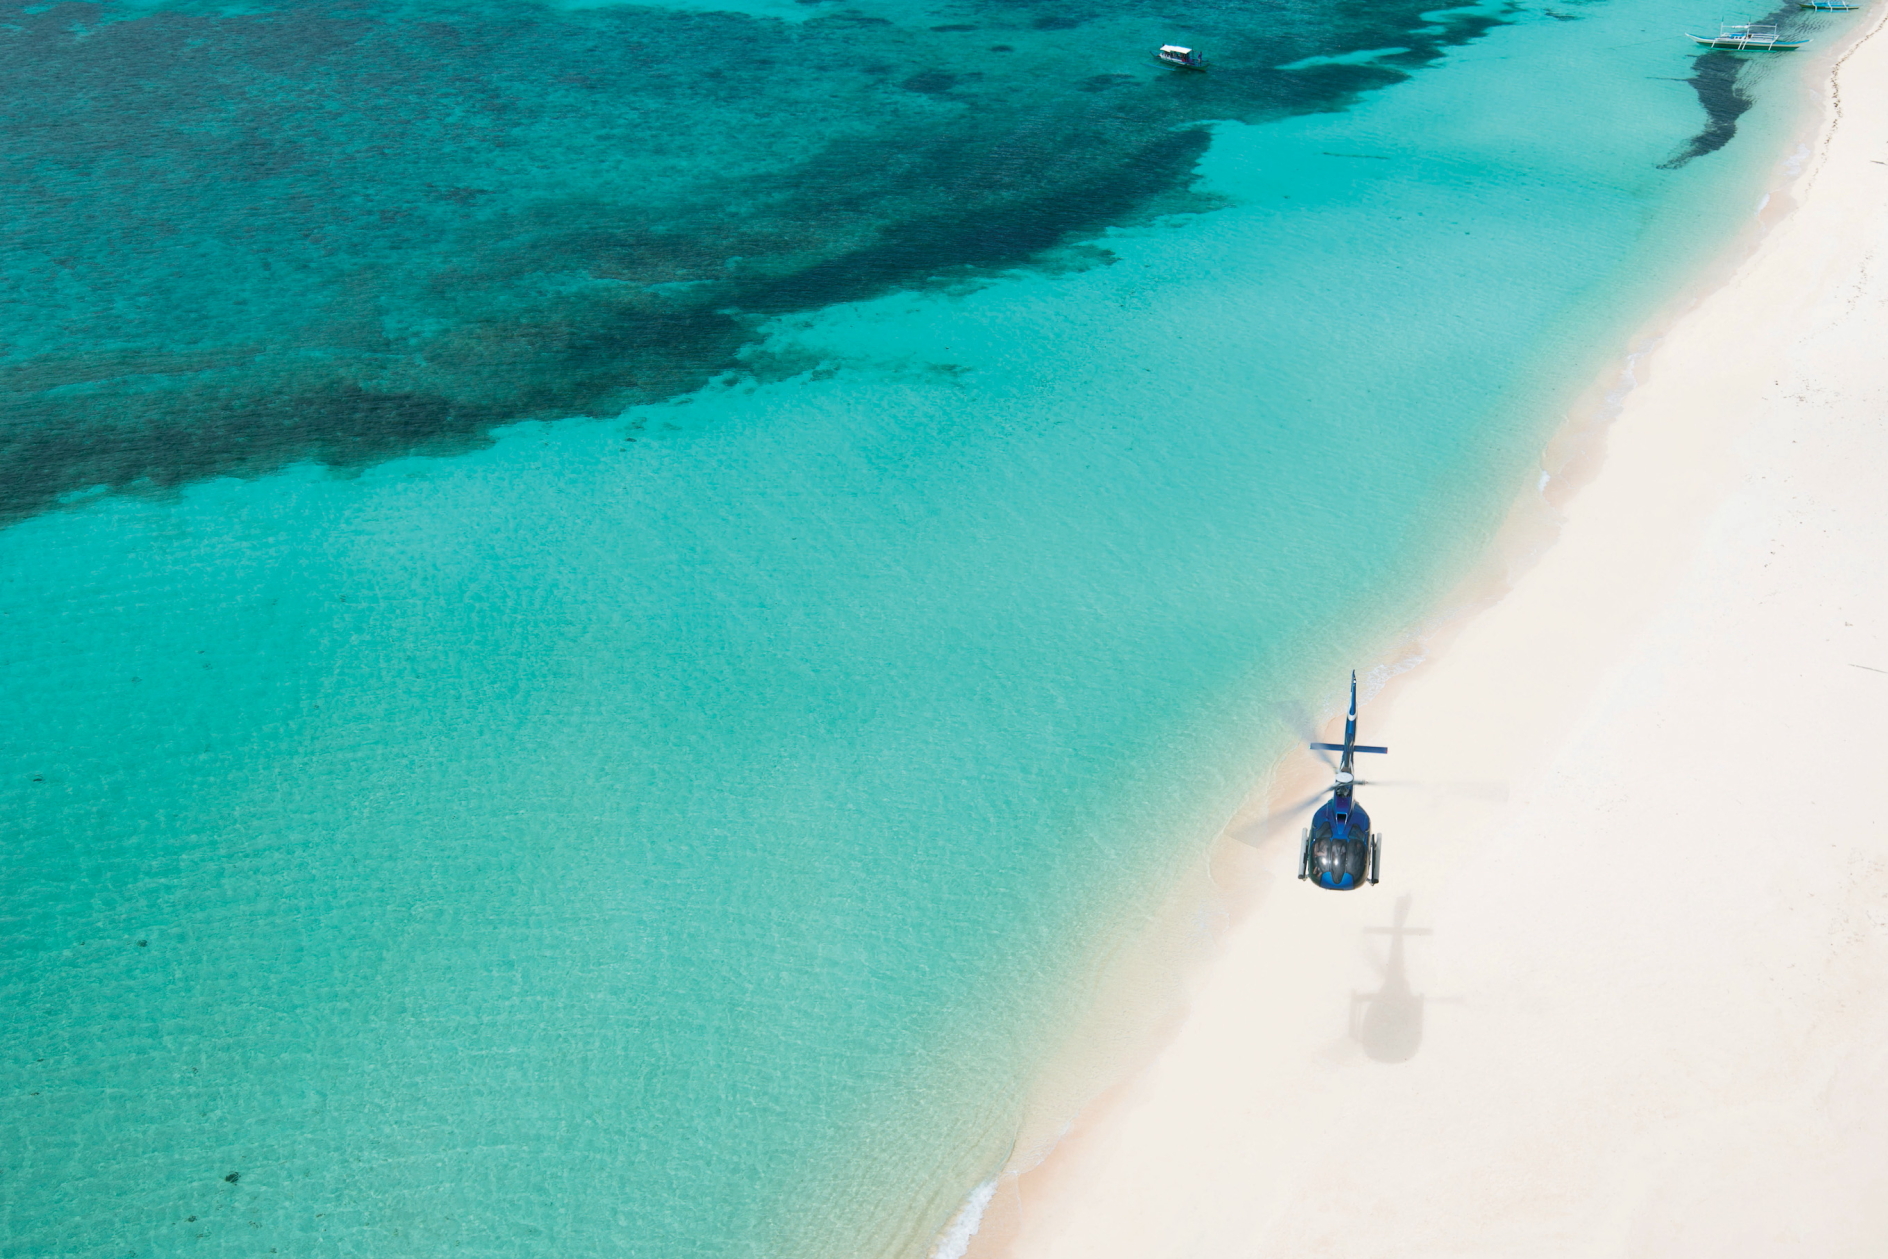 Banwa Private Island in Philippines has partnered with Ascent Flights Global to offer guests with exclusive transfers using seaplanes, helicopters and jets, as needed. Click to enlarge.